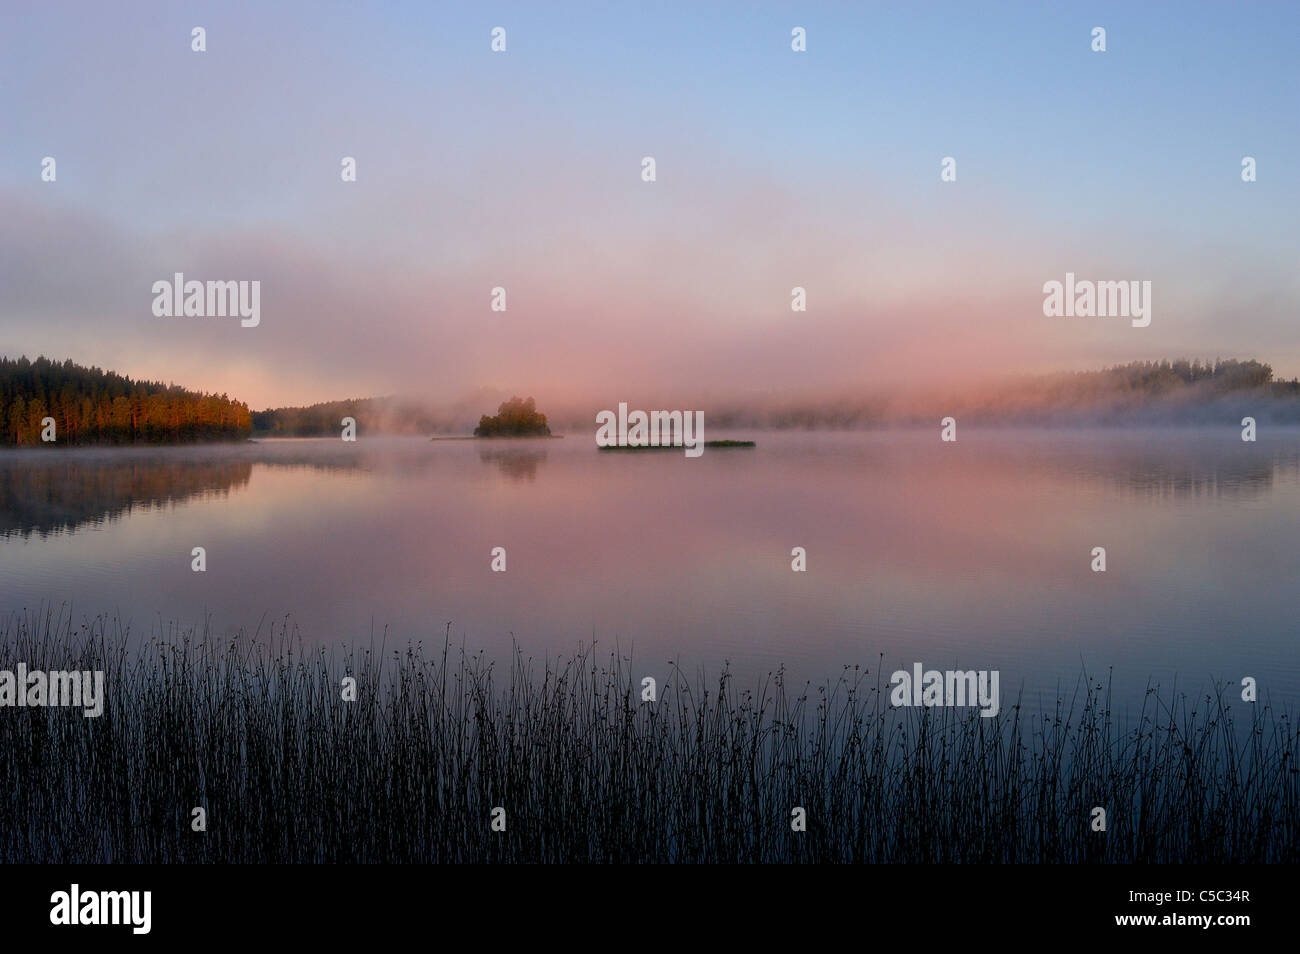 Misty and placid Morgonvy lake with reeds in the foreground Stock Photo